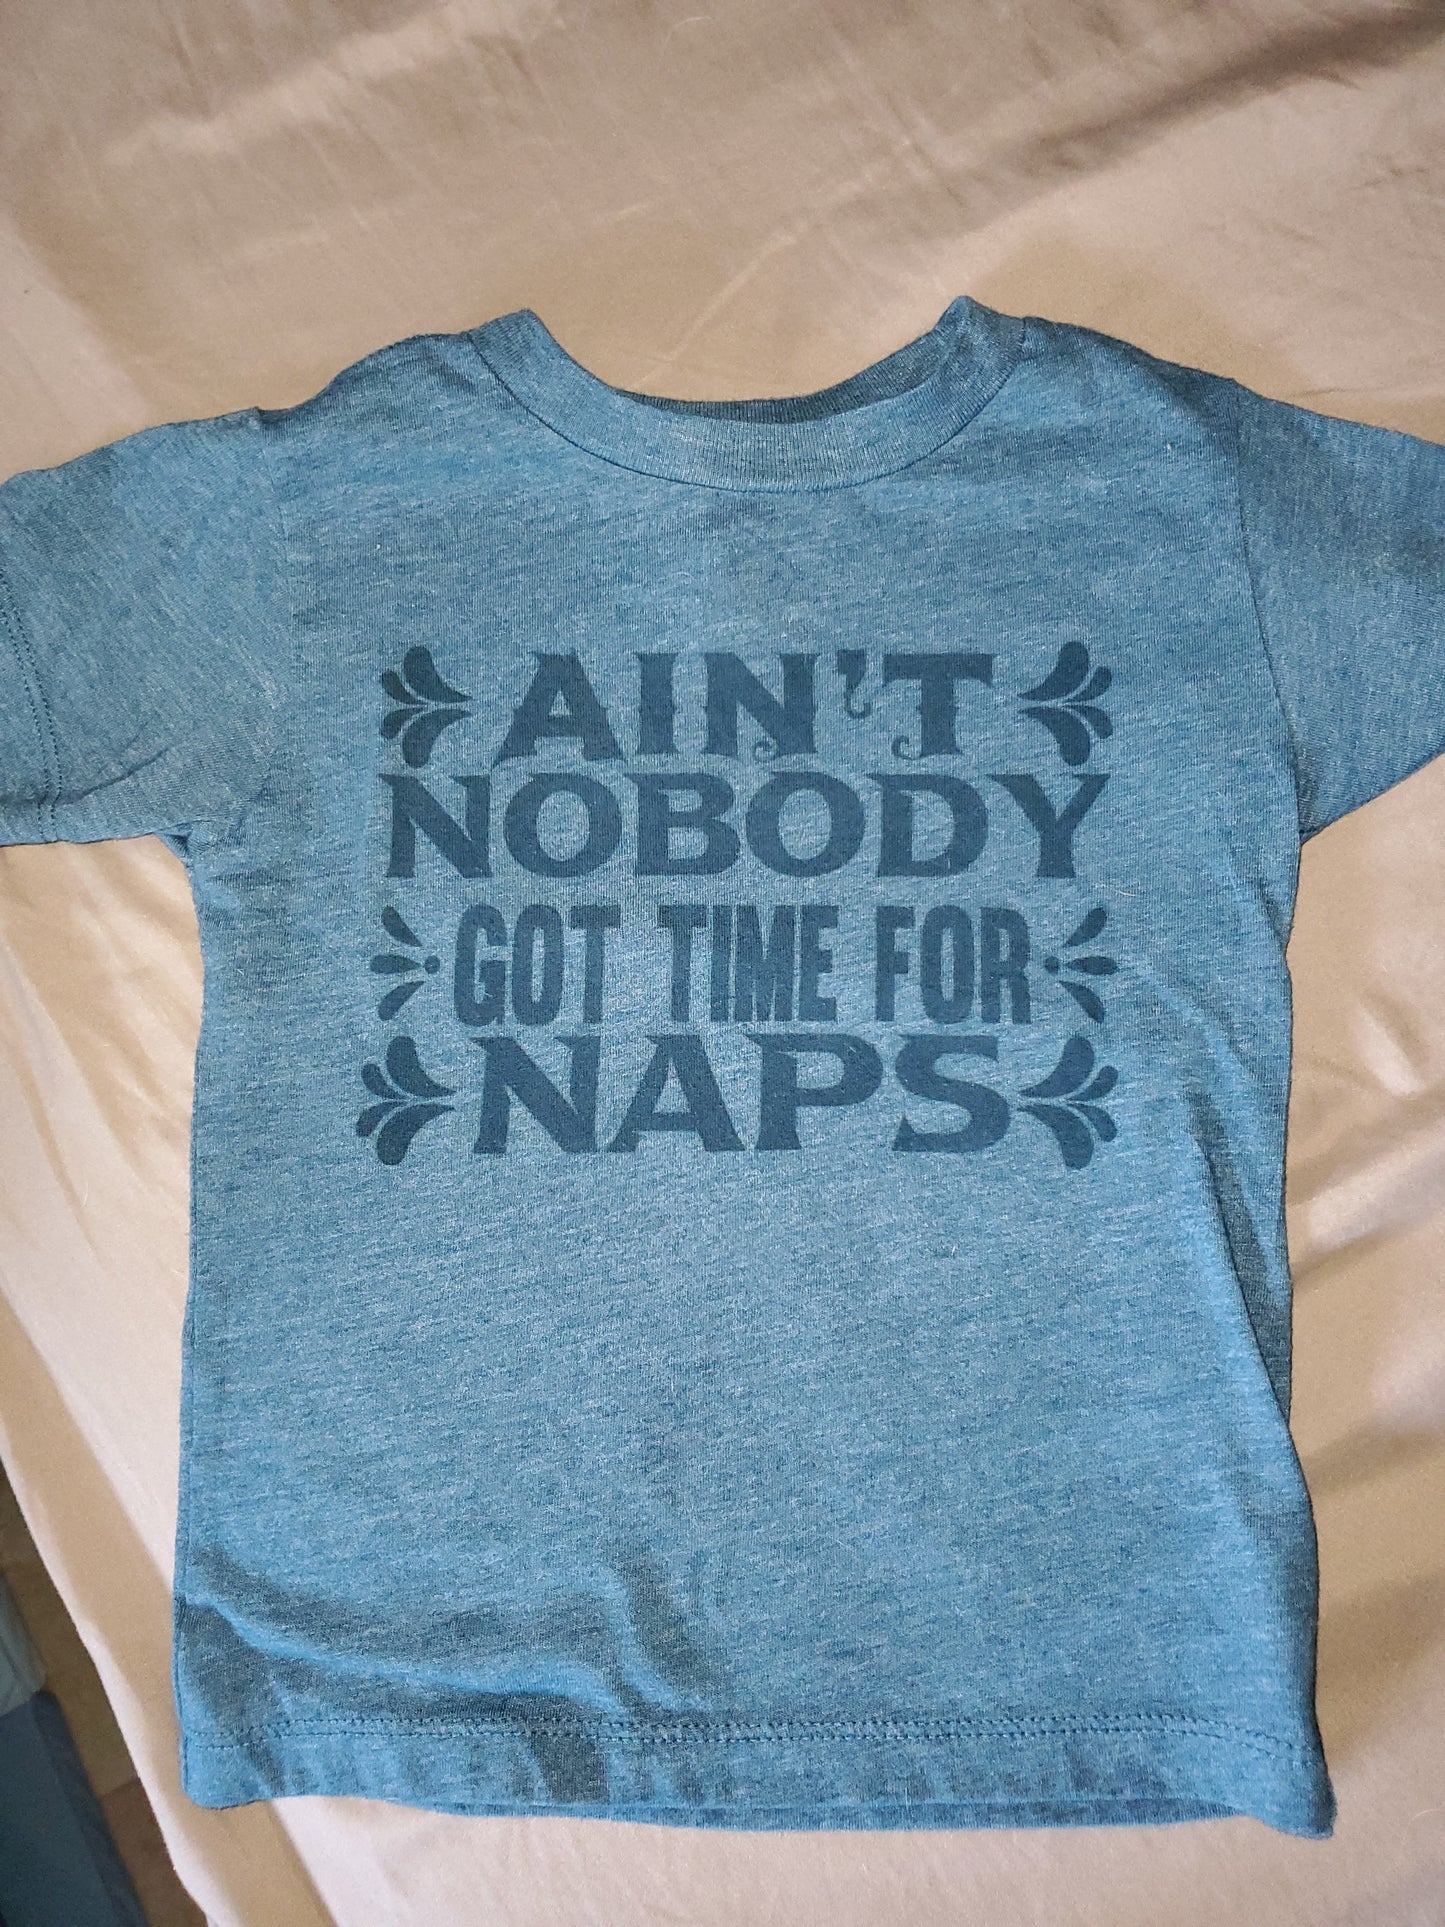 Aint nobody got time for naps